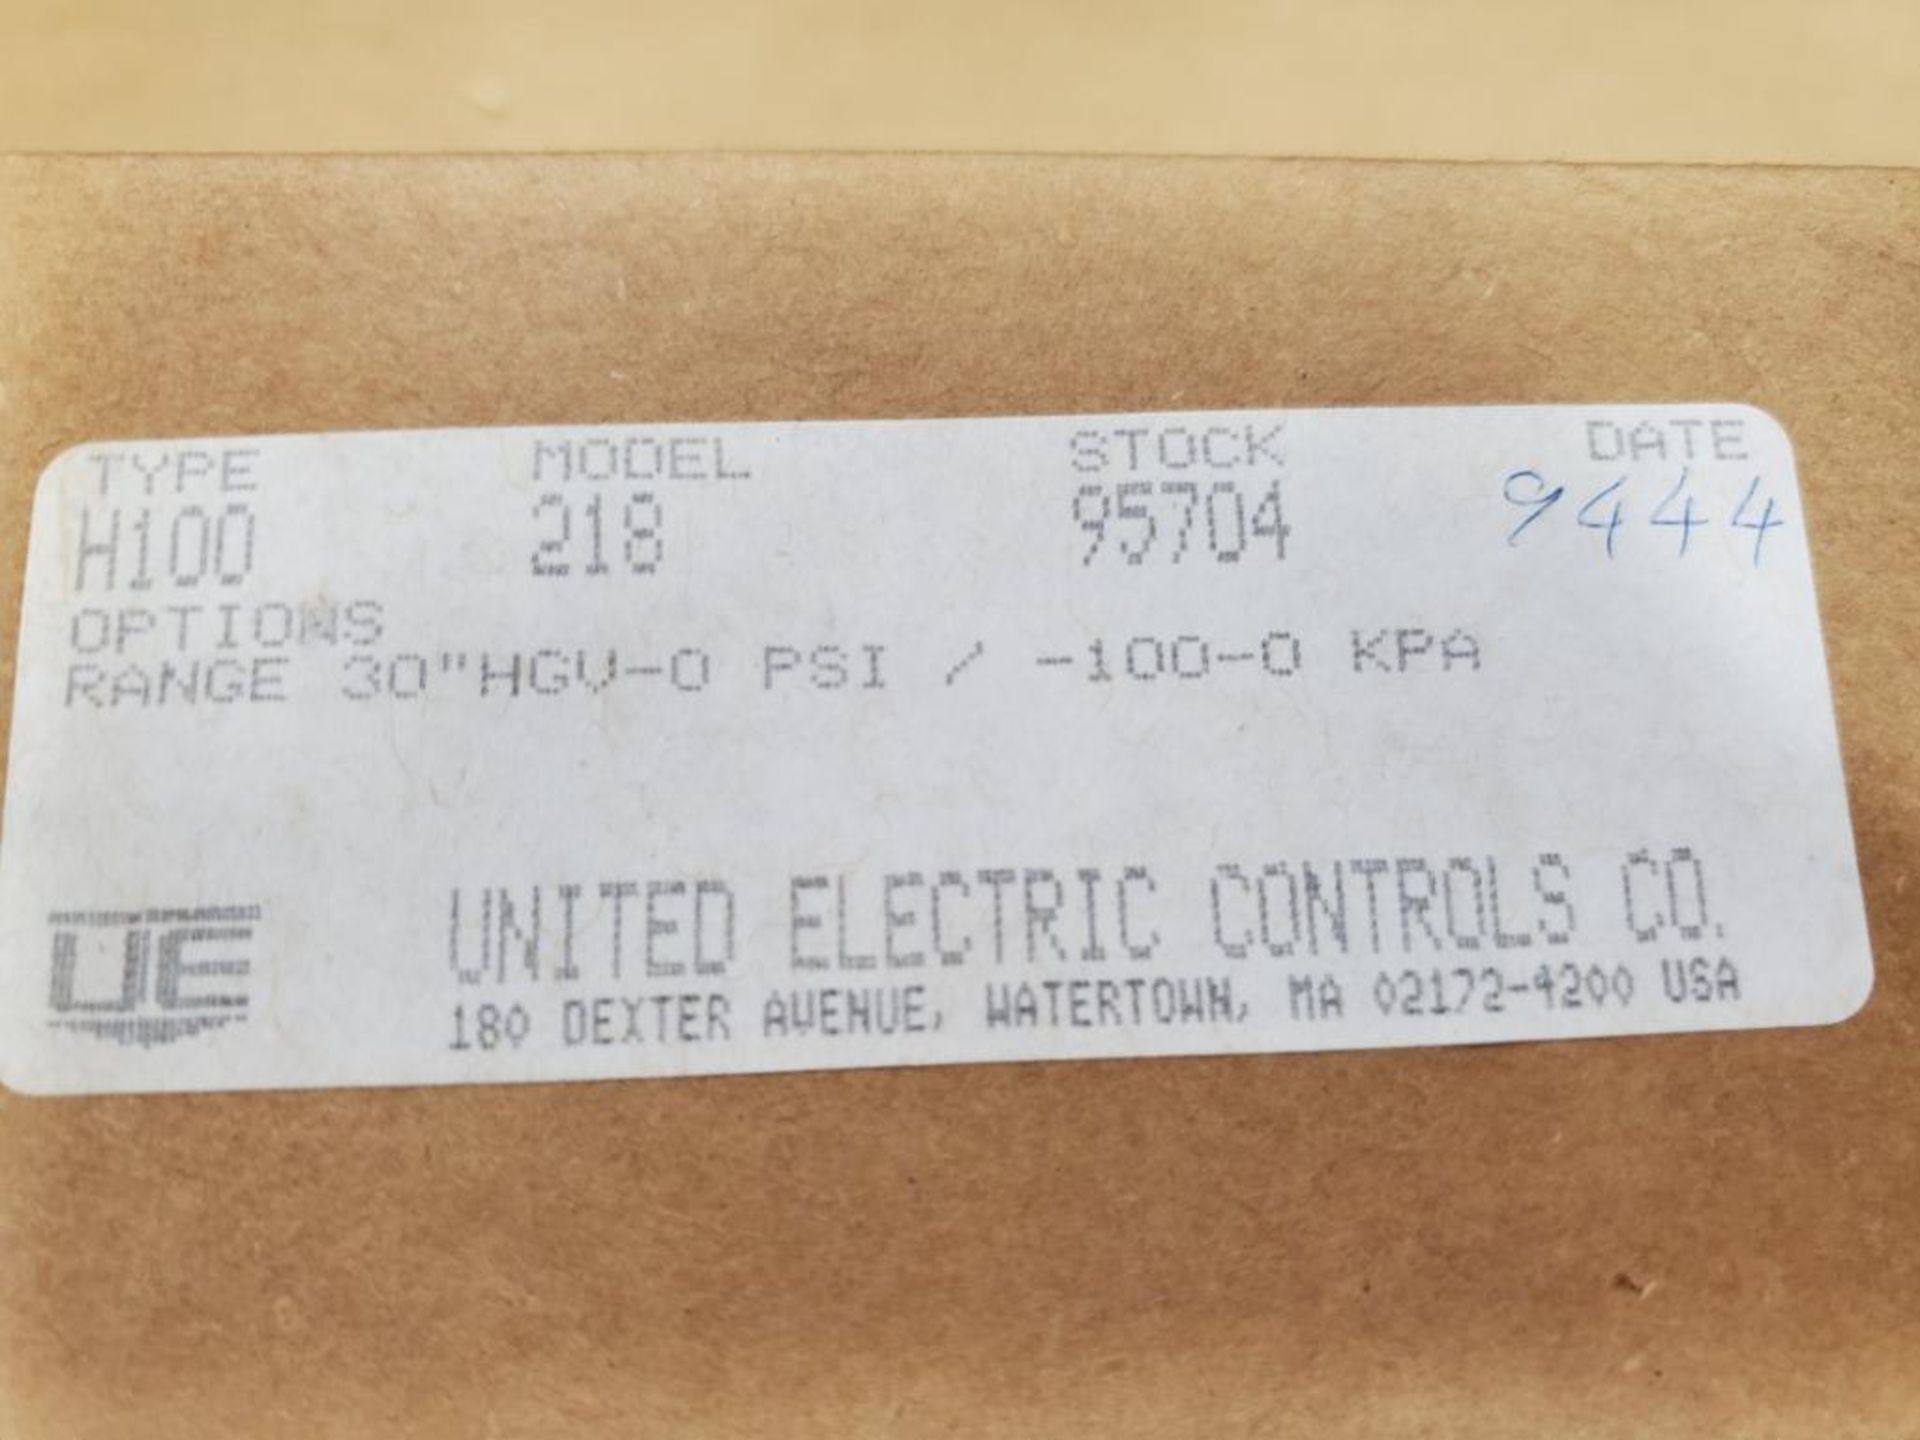 Qty 5 - United Electric controls H100 Model 218 gage. 30" HGV-0 PSI / -100-0 KPA. New in box. - Image 3 of 8